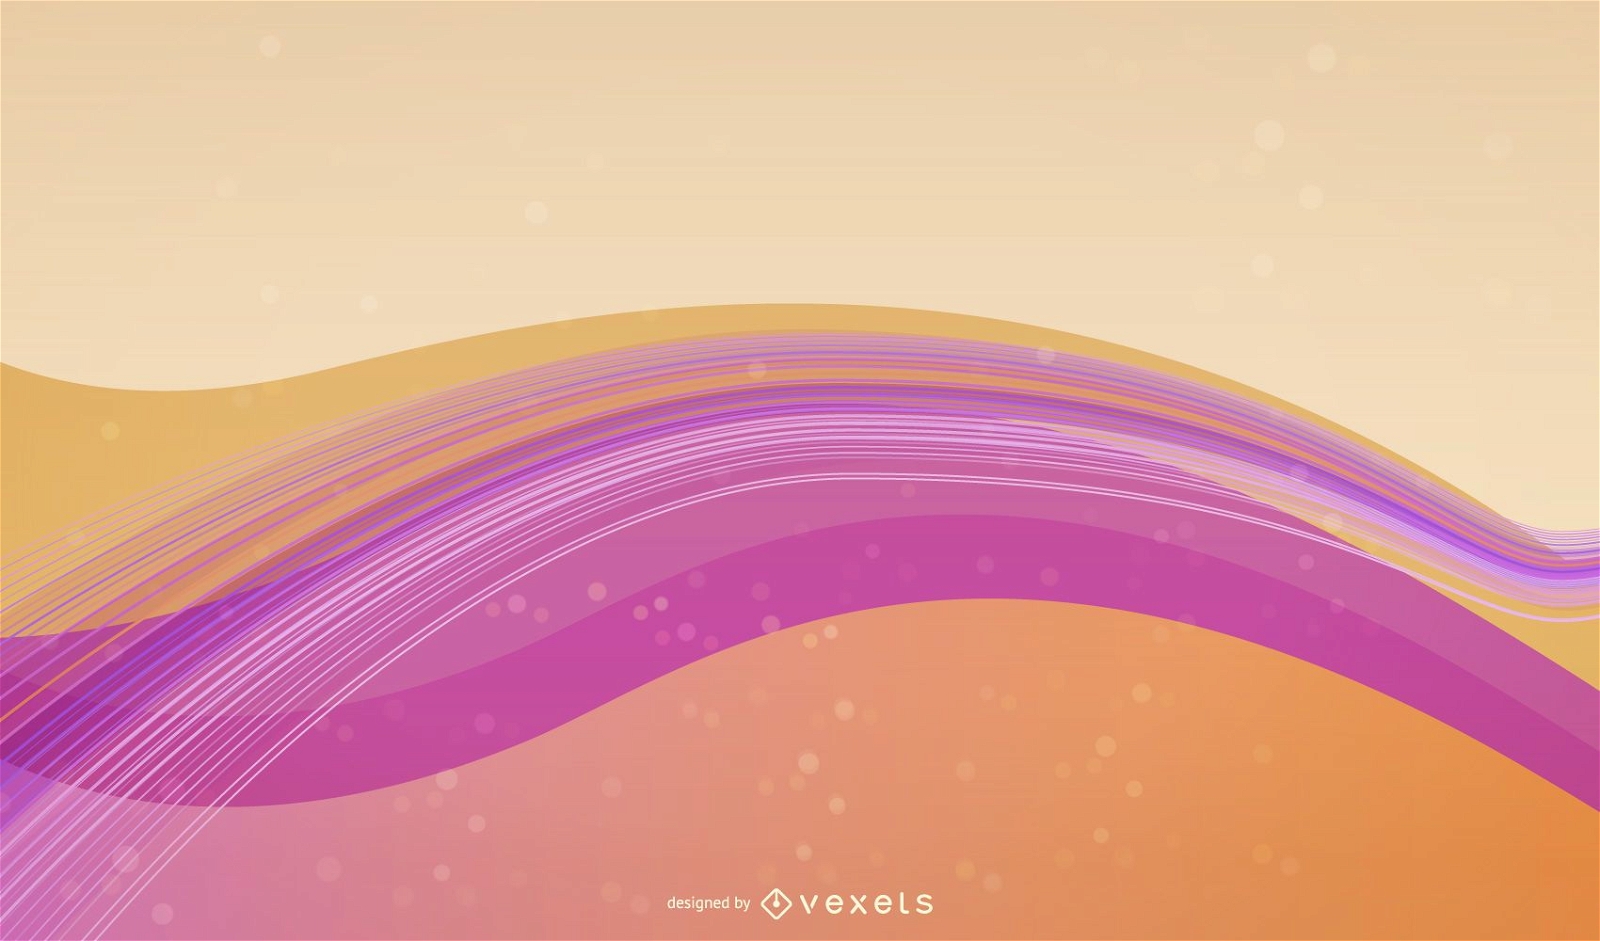 Glossy Colorful Waves & Spiral Lines Background